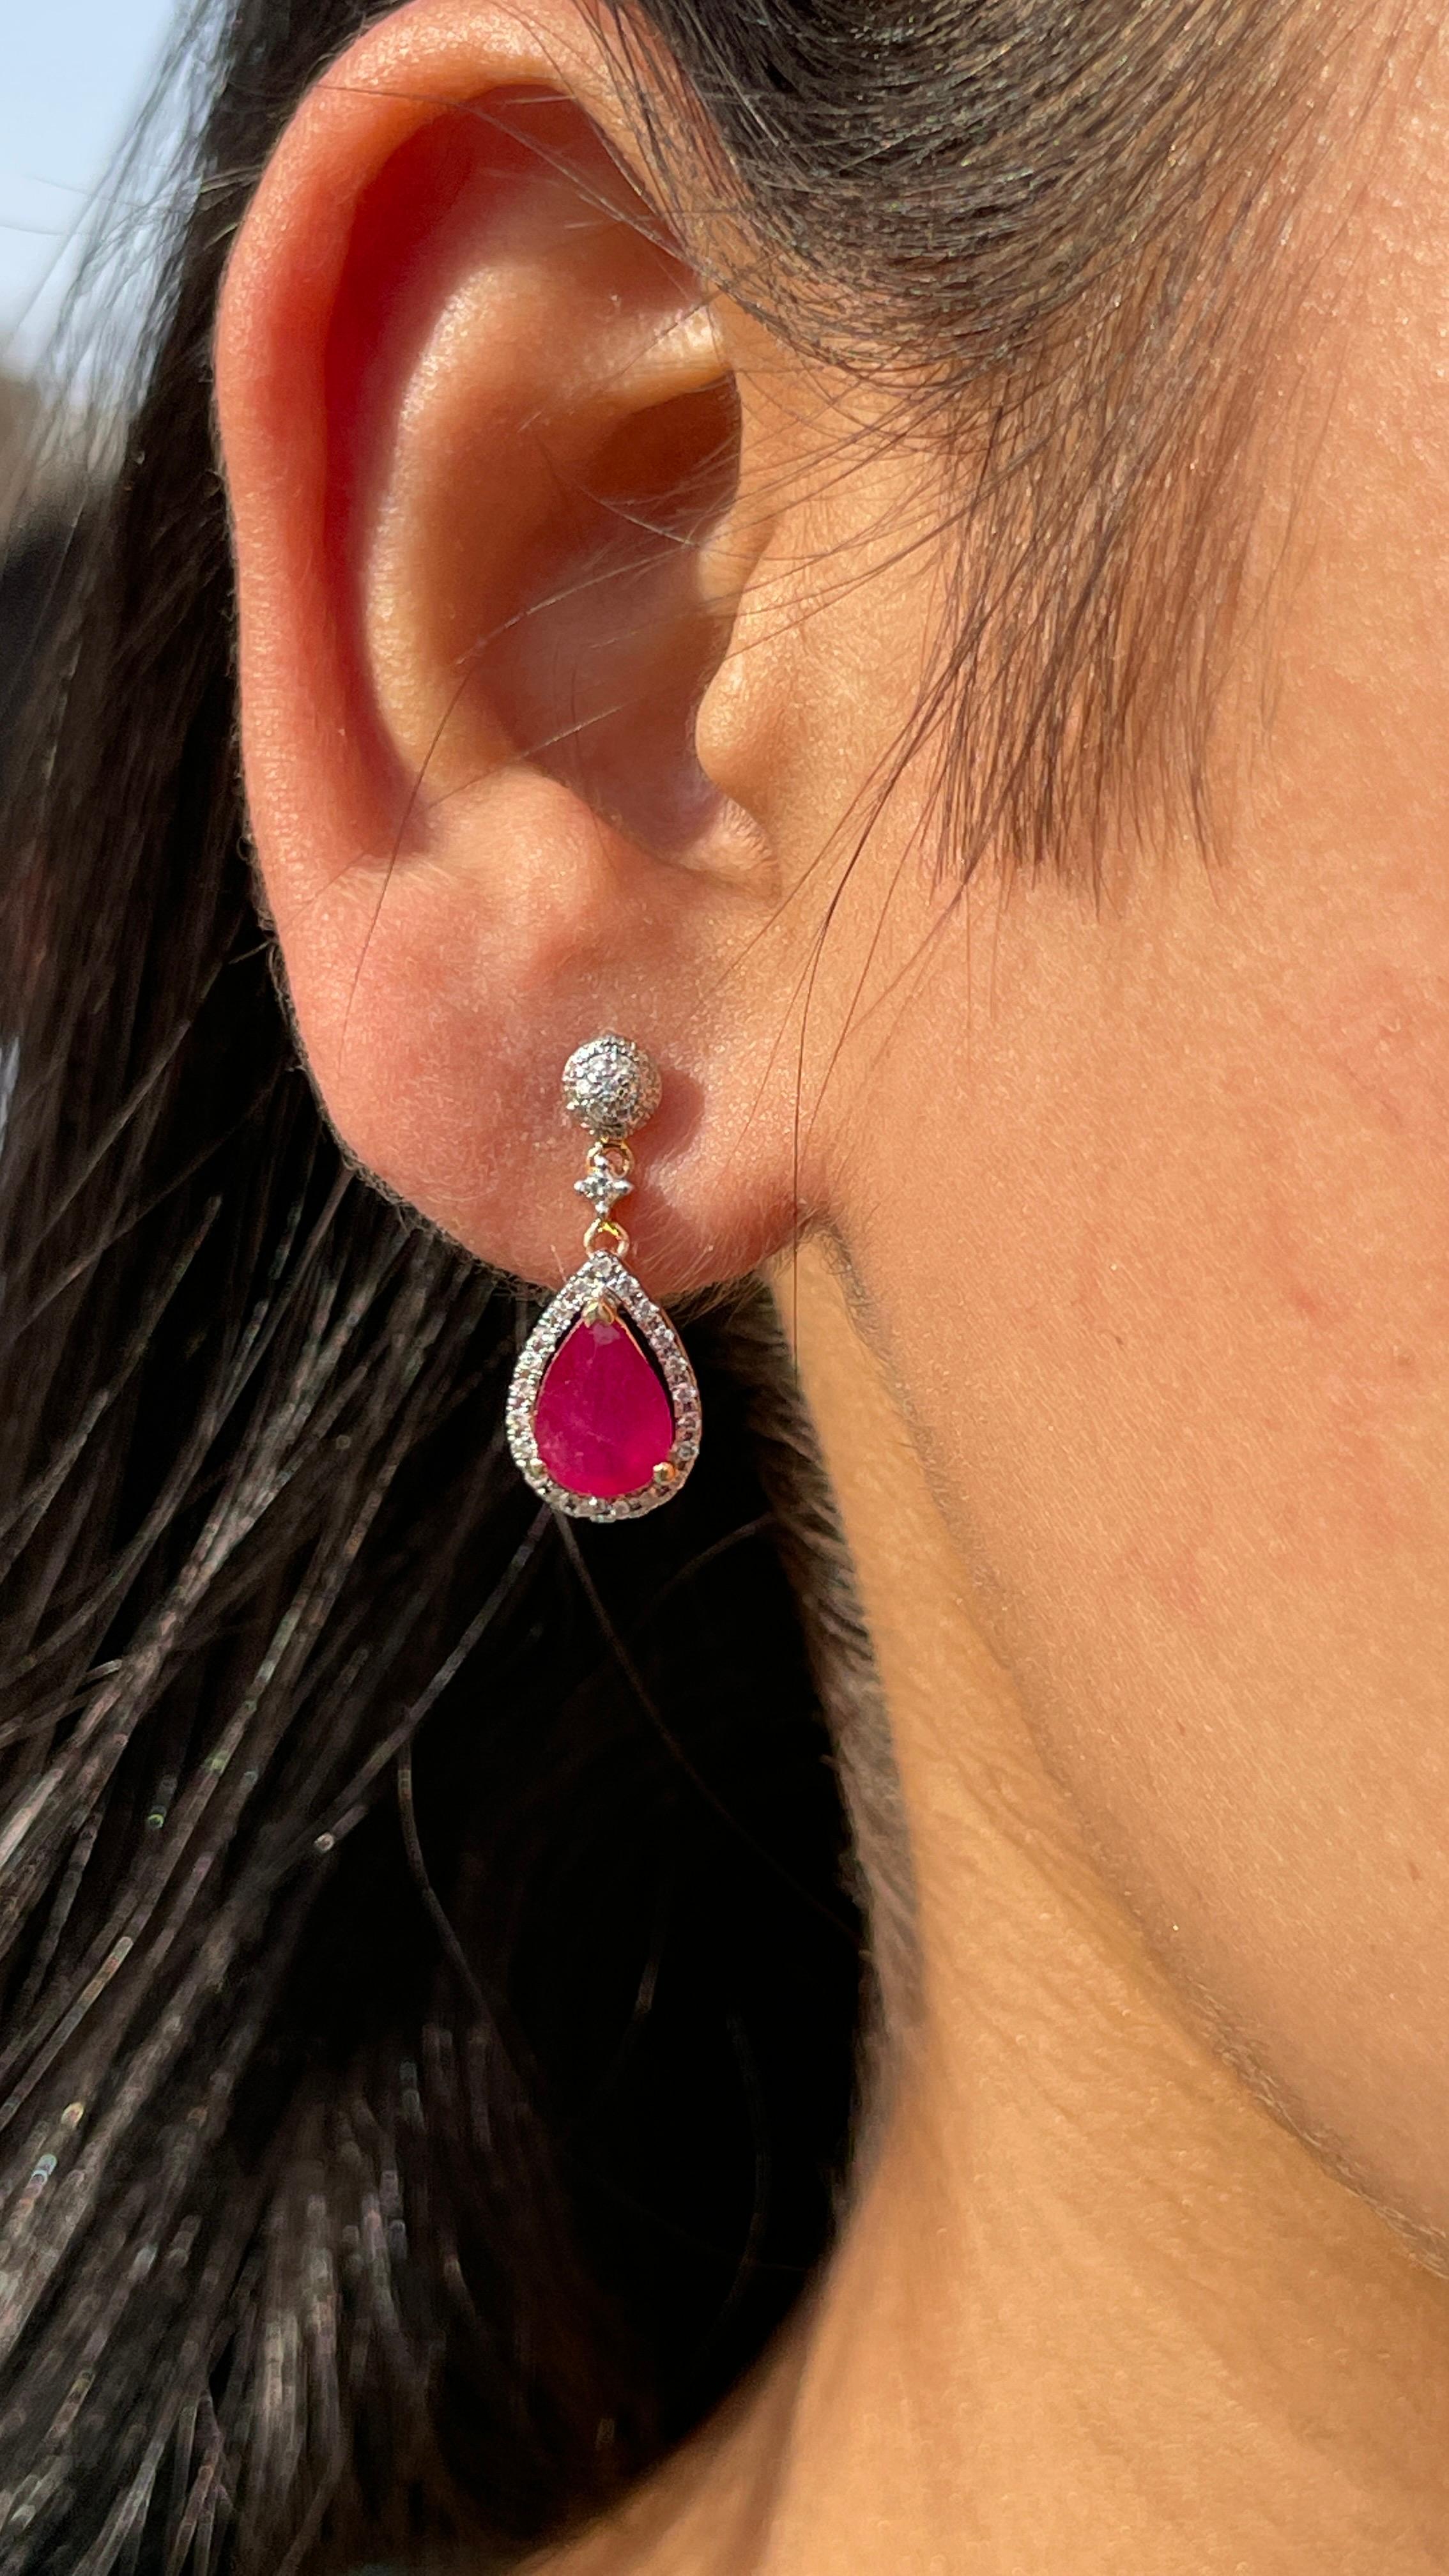 Ruby Drop and Dangle earrings with diamonds to make a statement with your look. These earrings create a sparkling, luxurious look featuring pear cut gemstone.
If you love to gravitate towards unique styles, this piece of jewelry is perfect for